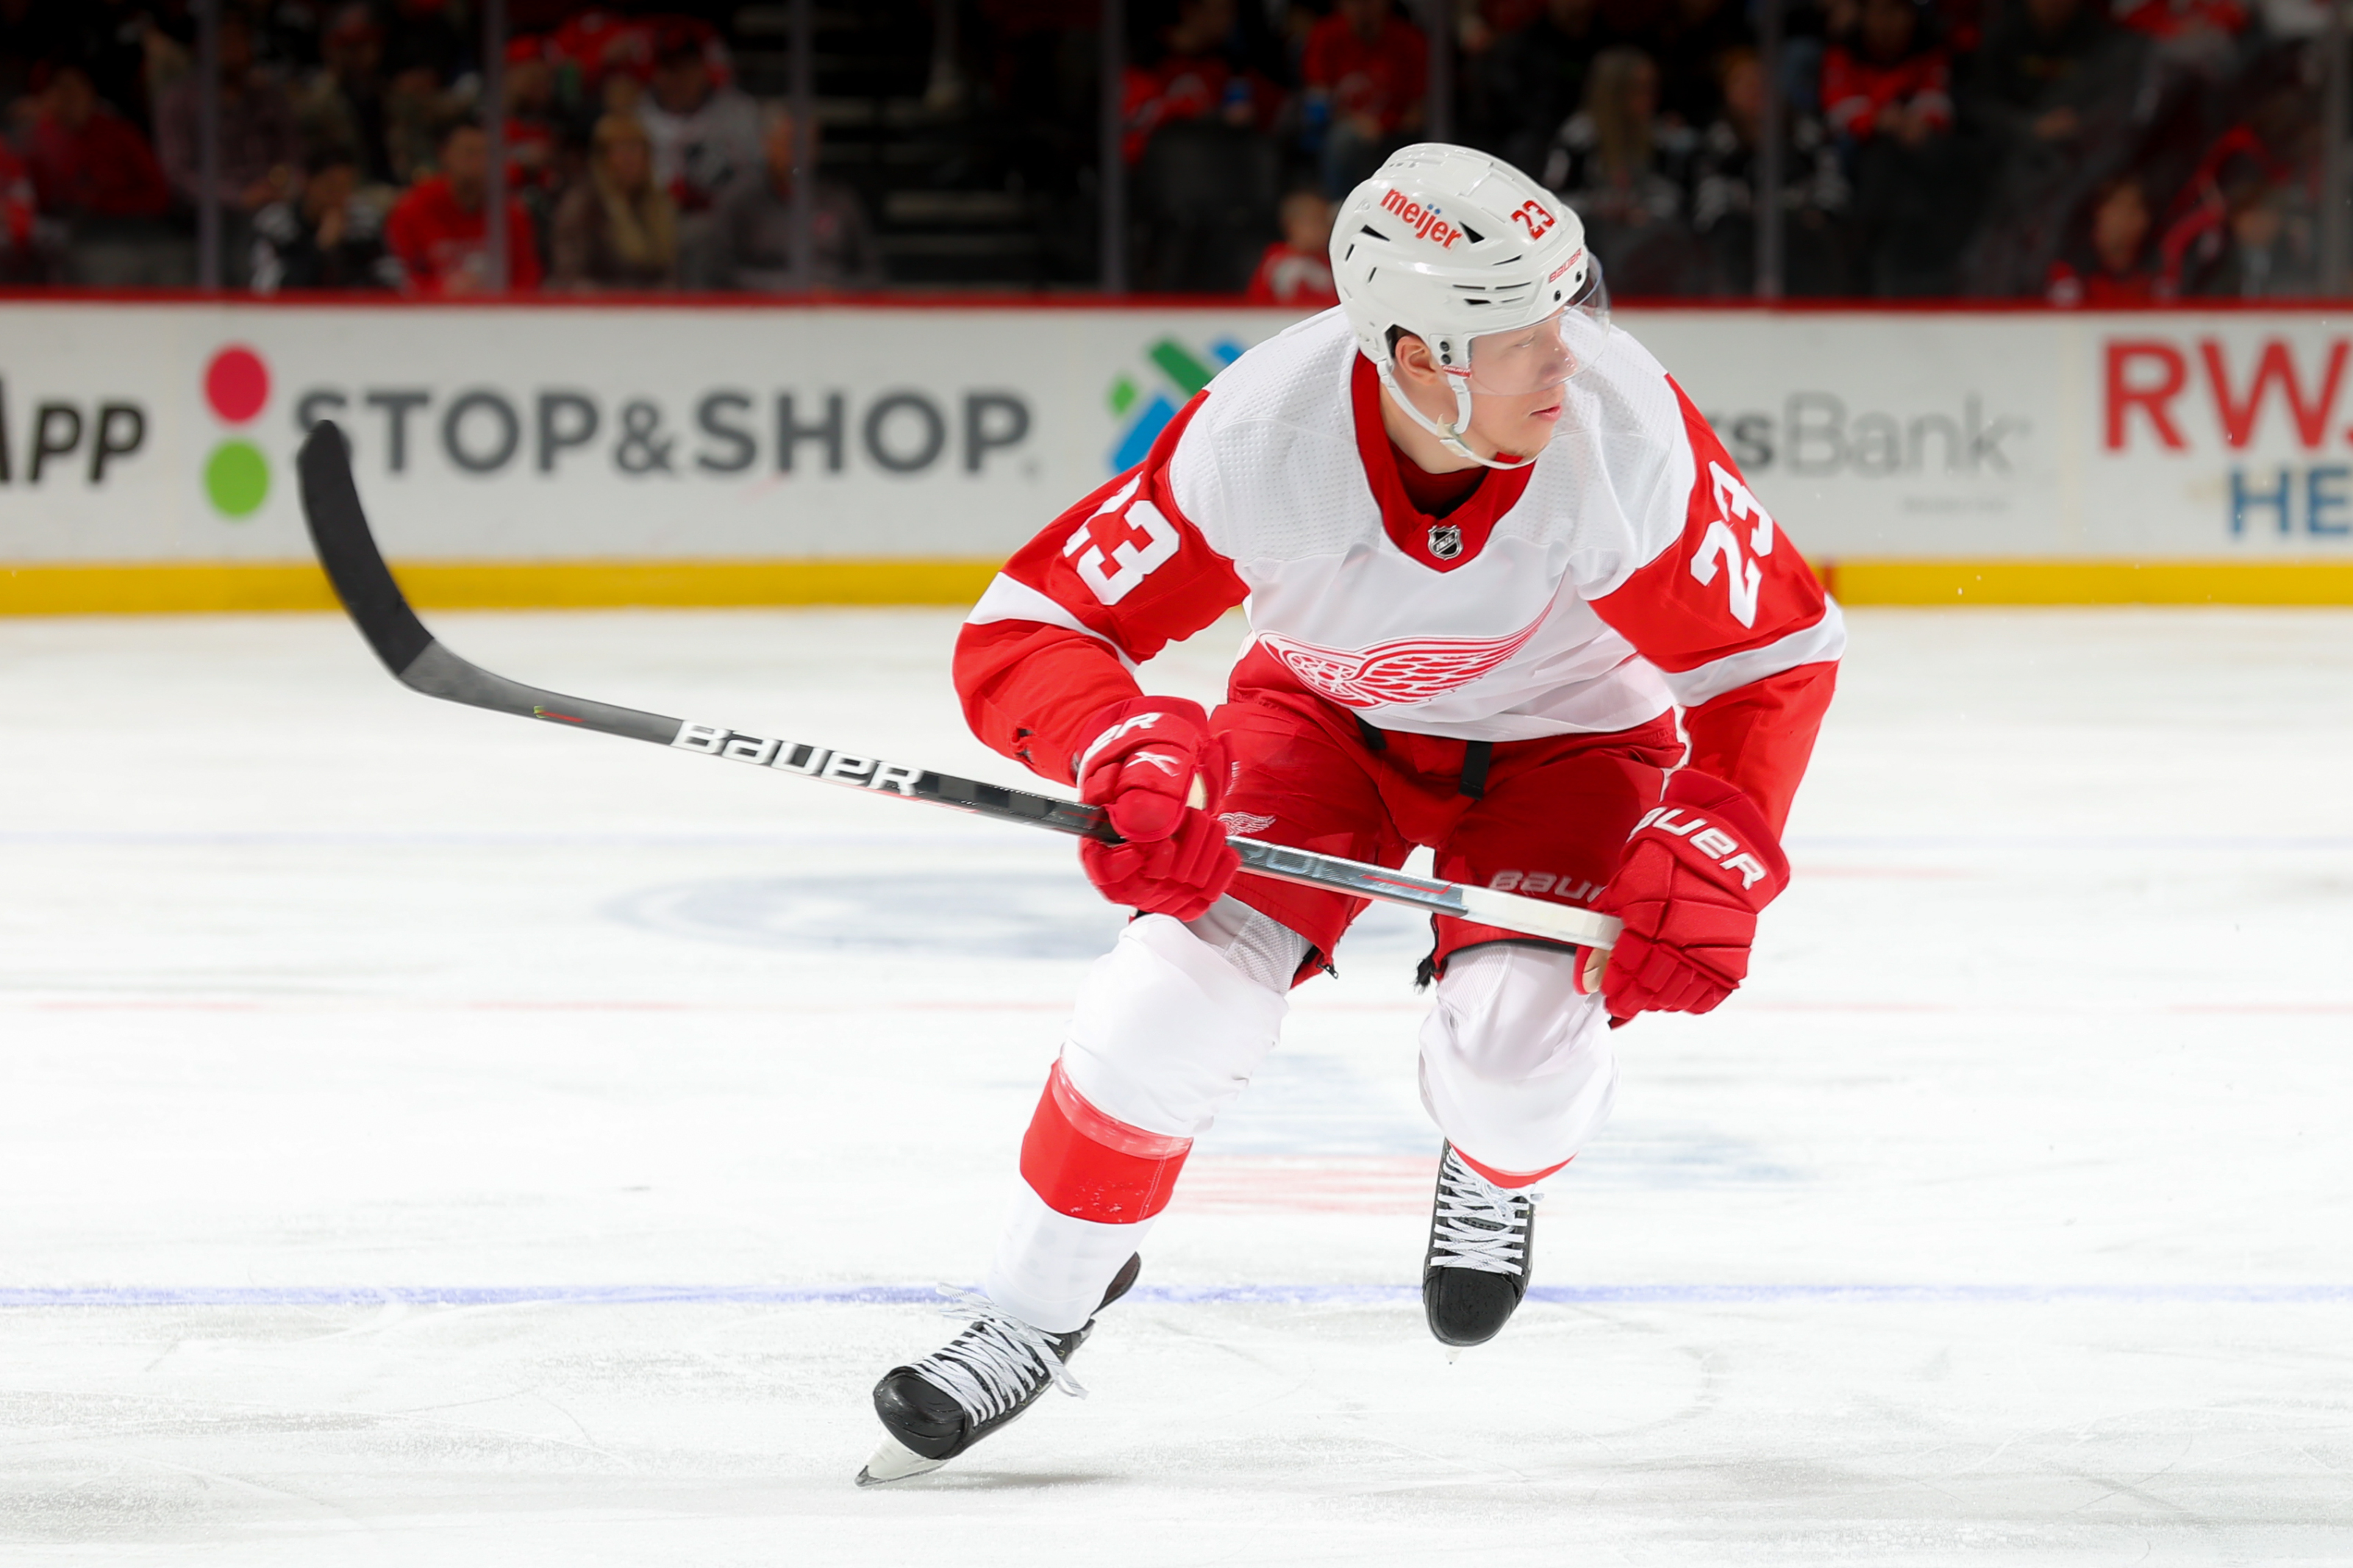 Detroit Red Wings Could Shop for Offense this Summer